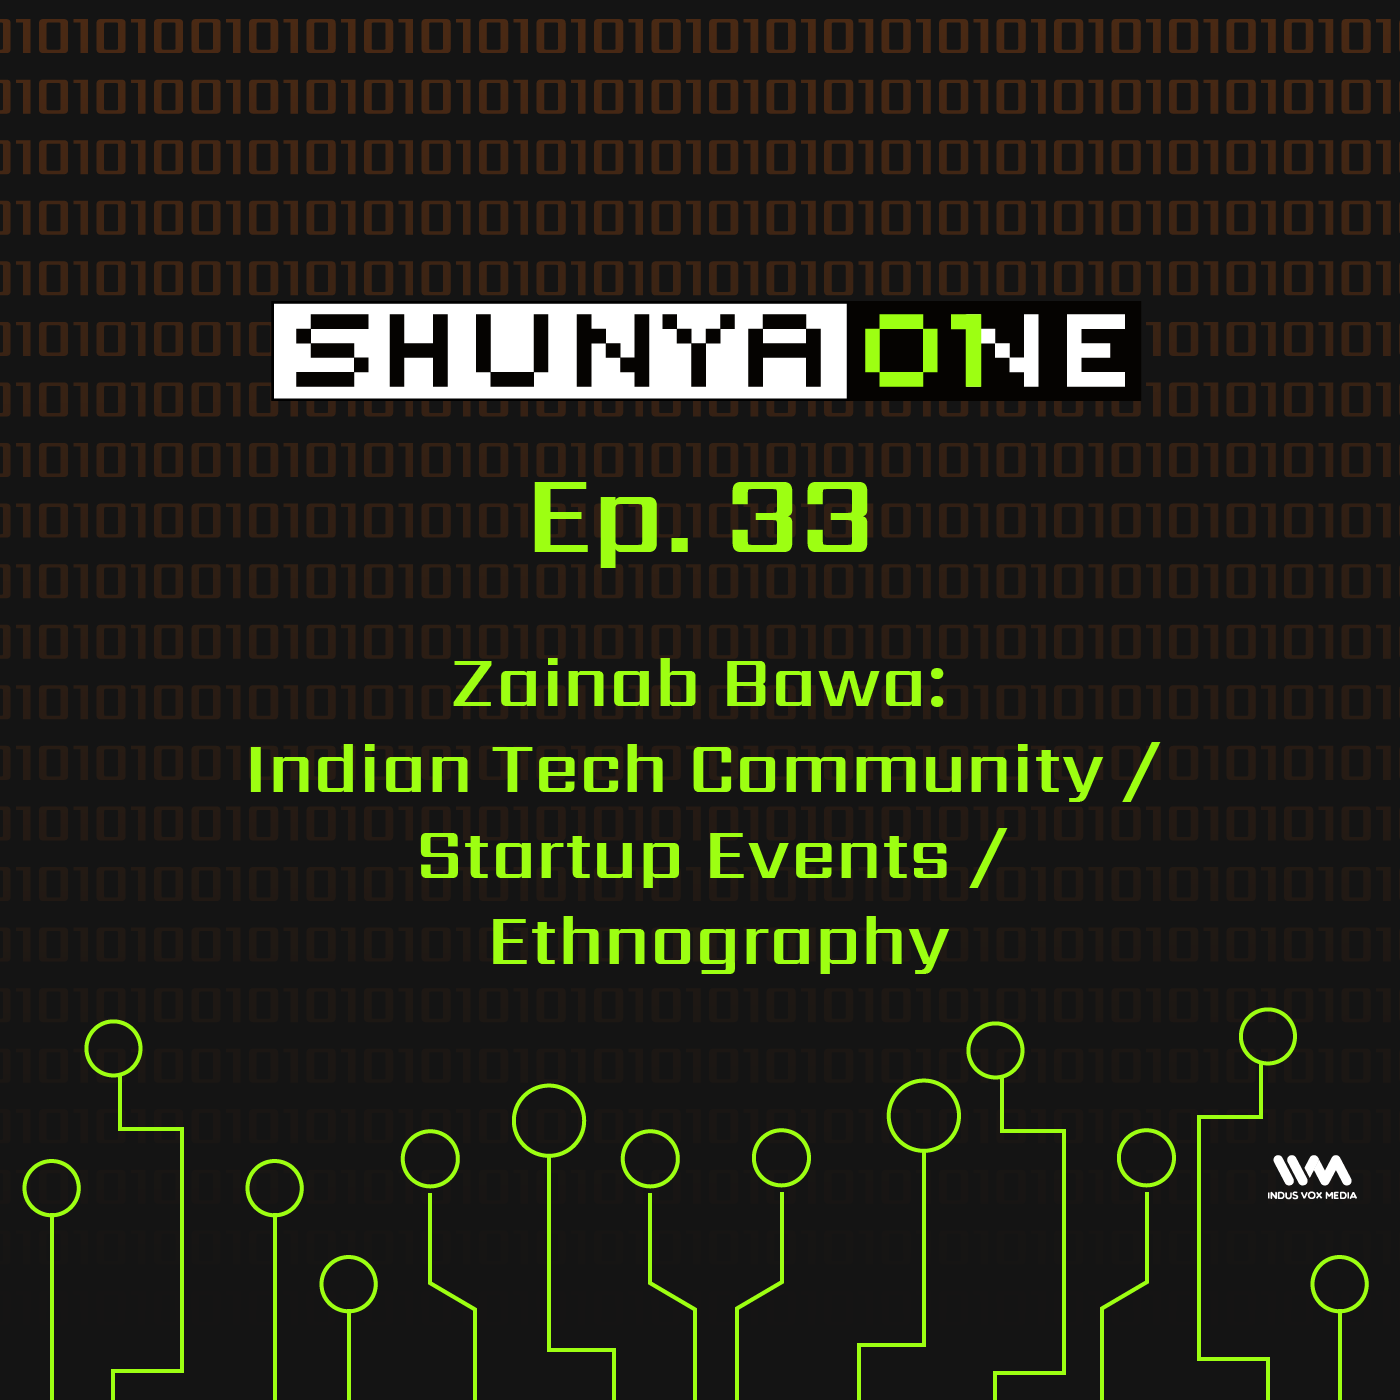 Feat. Zainab Bawa: Indian Tech Community / Startup Events / Ethnography